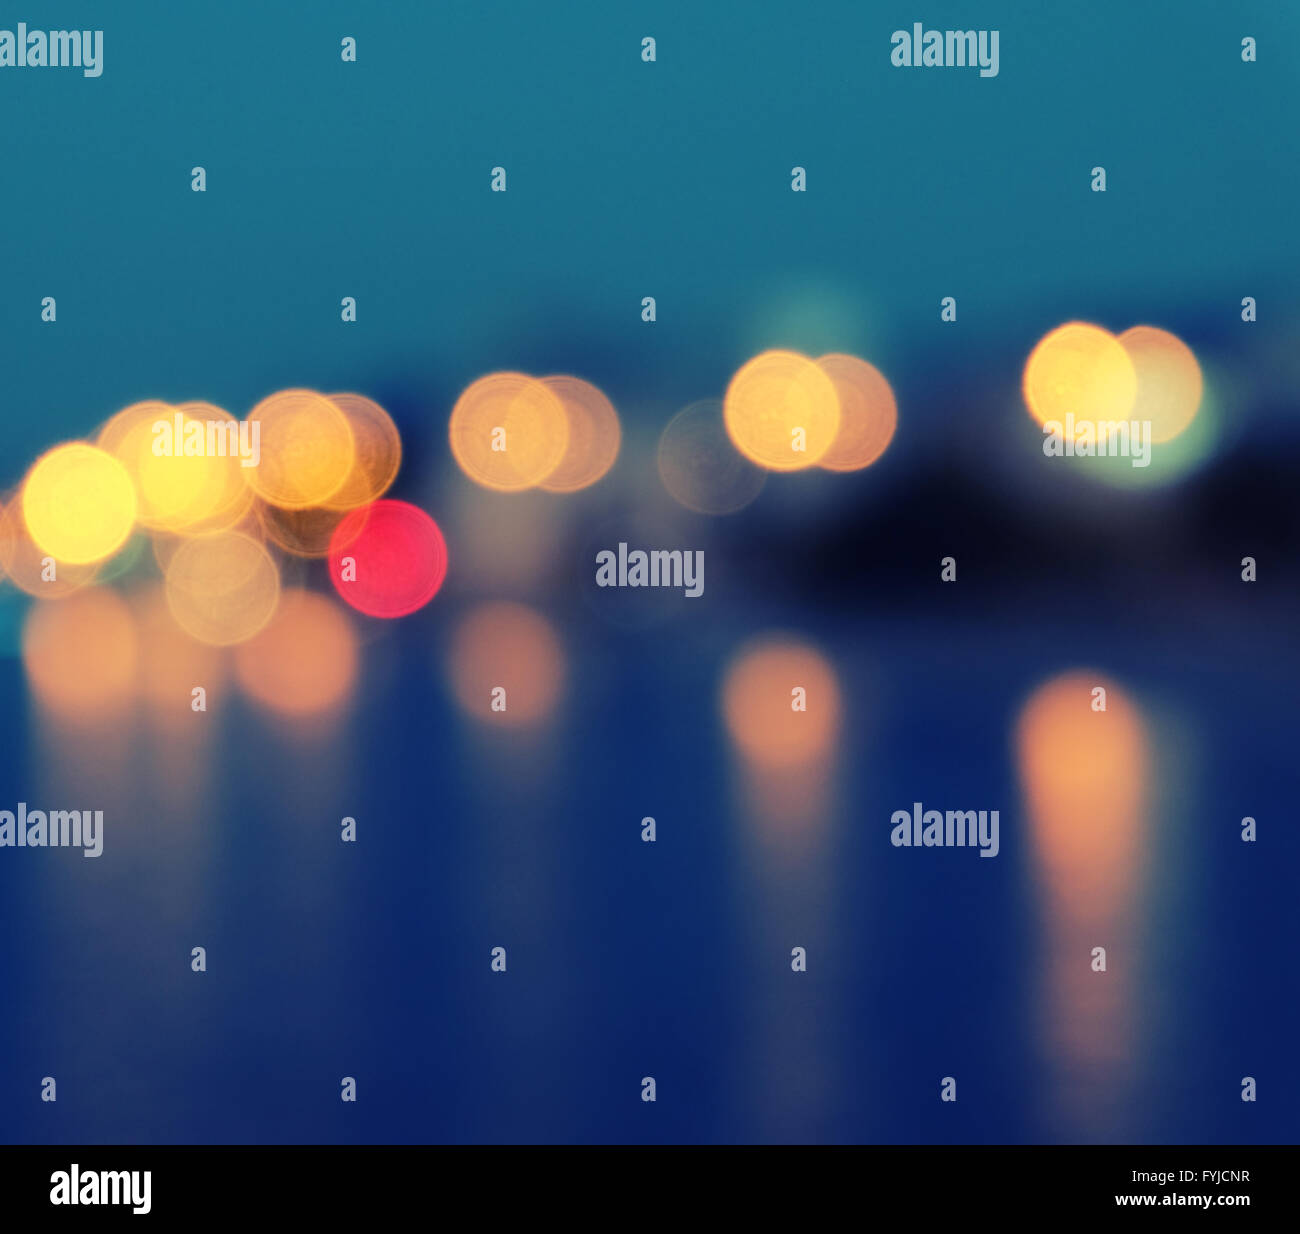 Square image of a blurred city lights with bokeh effect reflected on water. Stock Photo